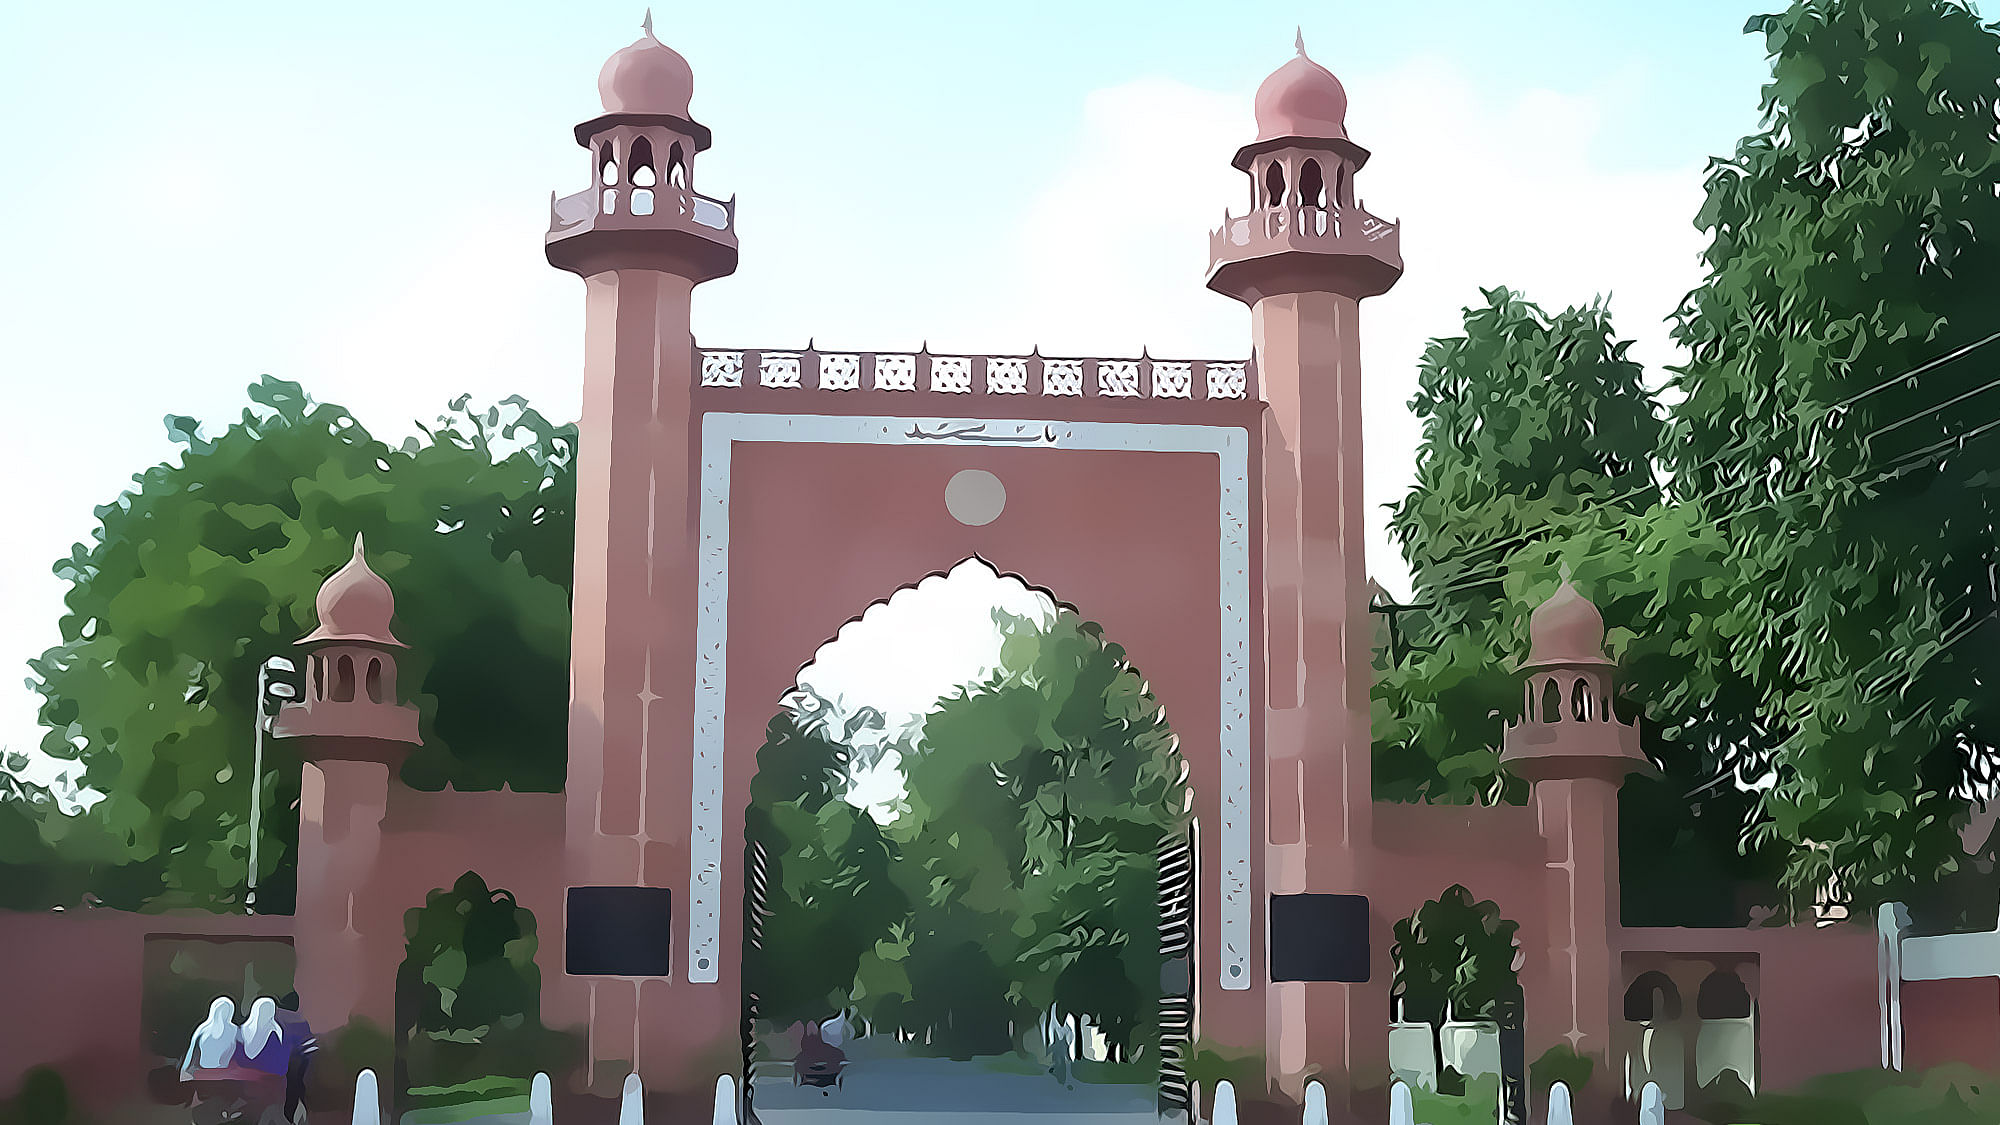 As question looms large over the minority status of AMU, politics also creeps in with leaders choosing to take a stand on either side of the spectrum. (Photo: The Quint)